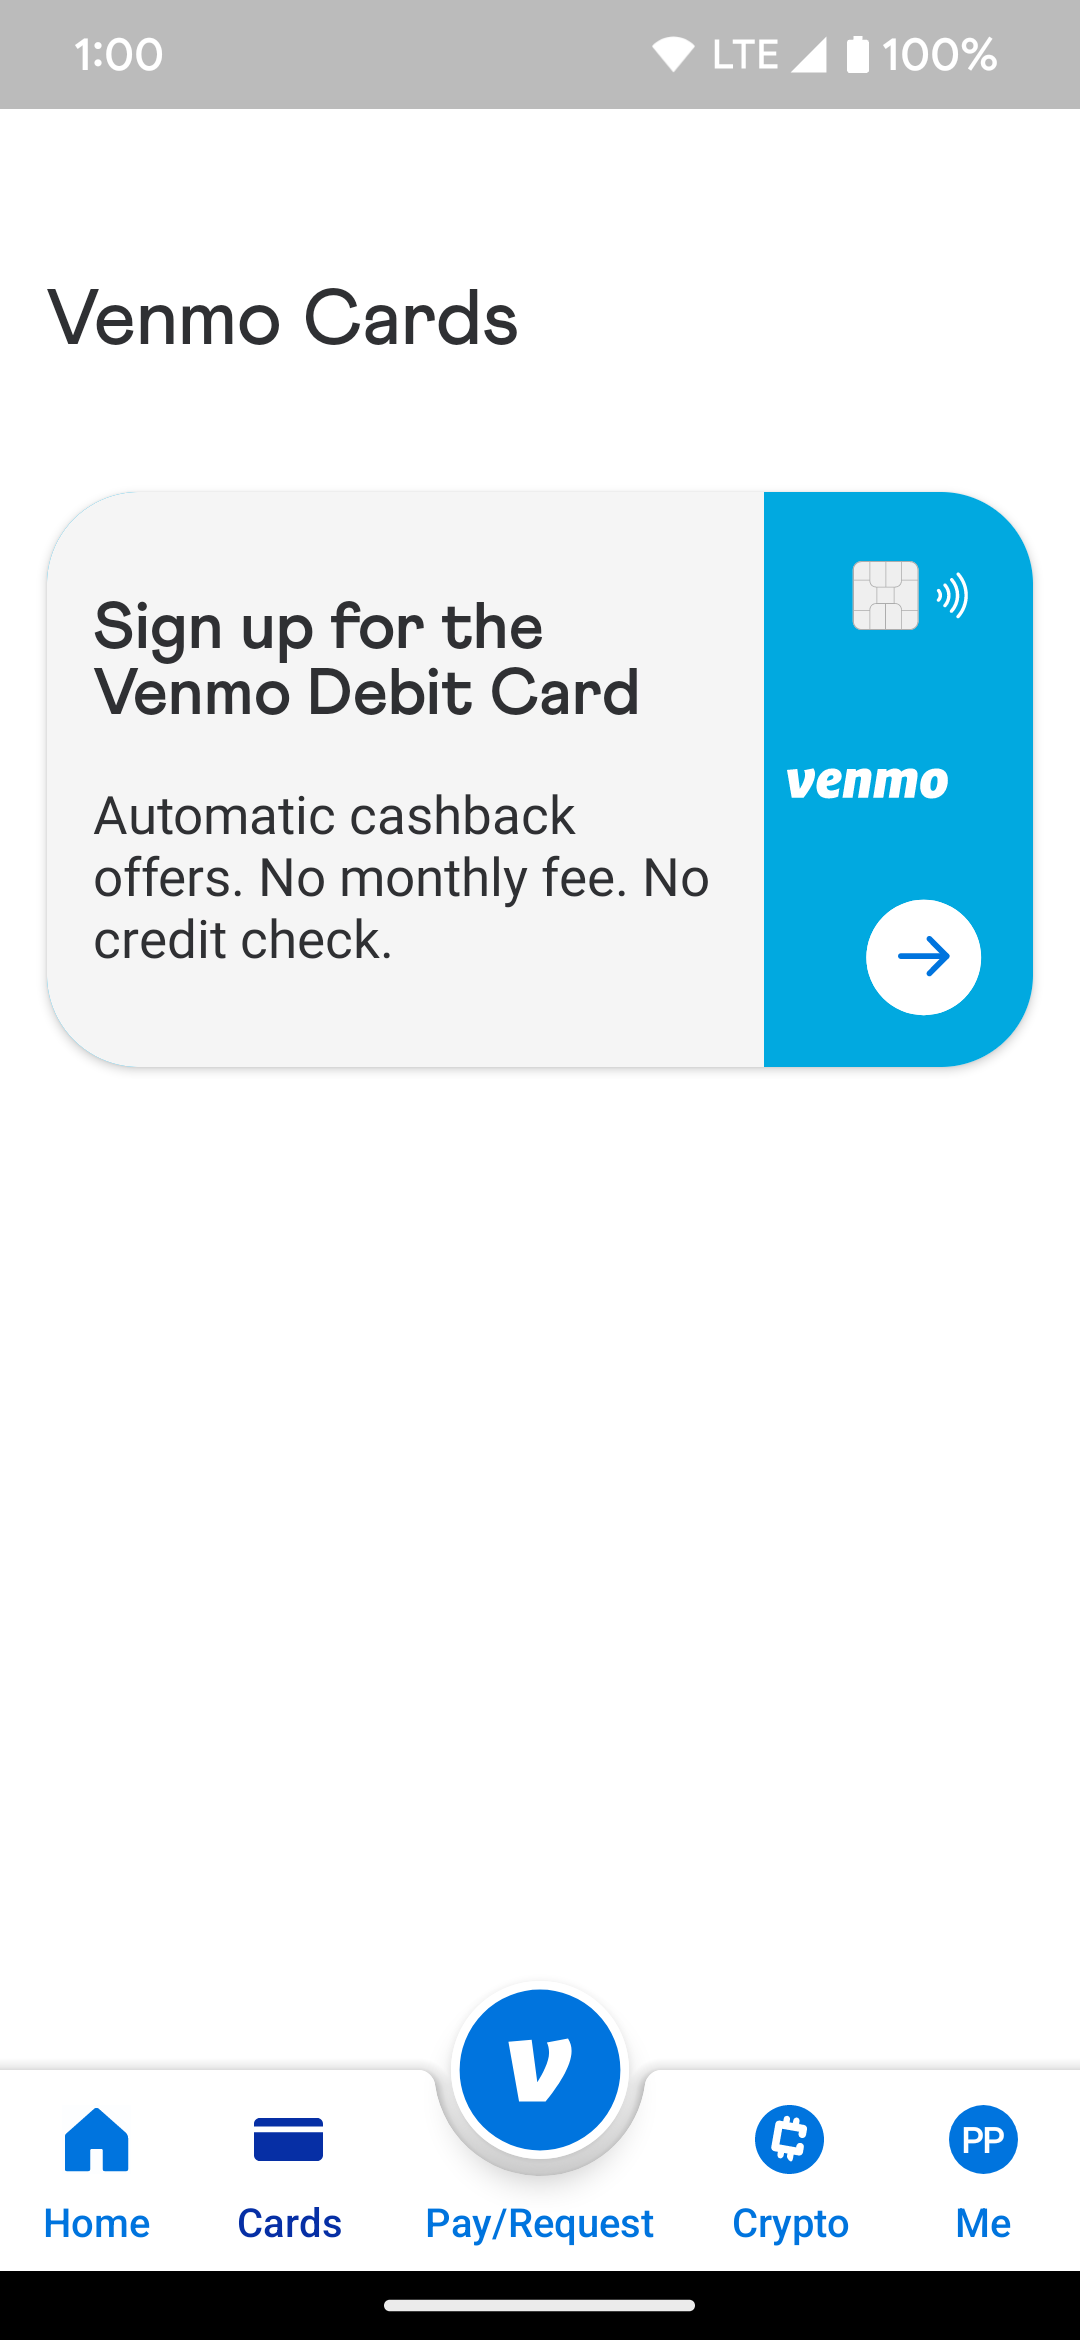 The main Cards page in the Venmo app